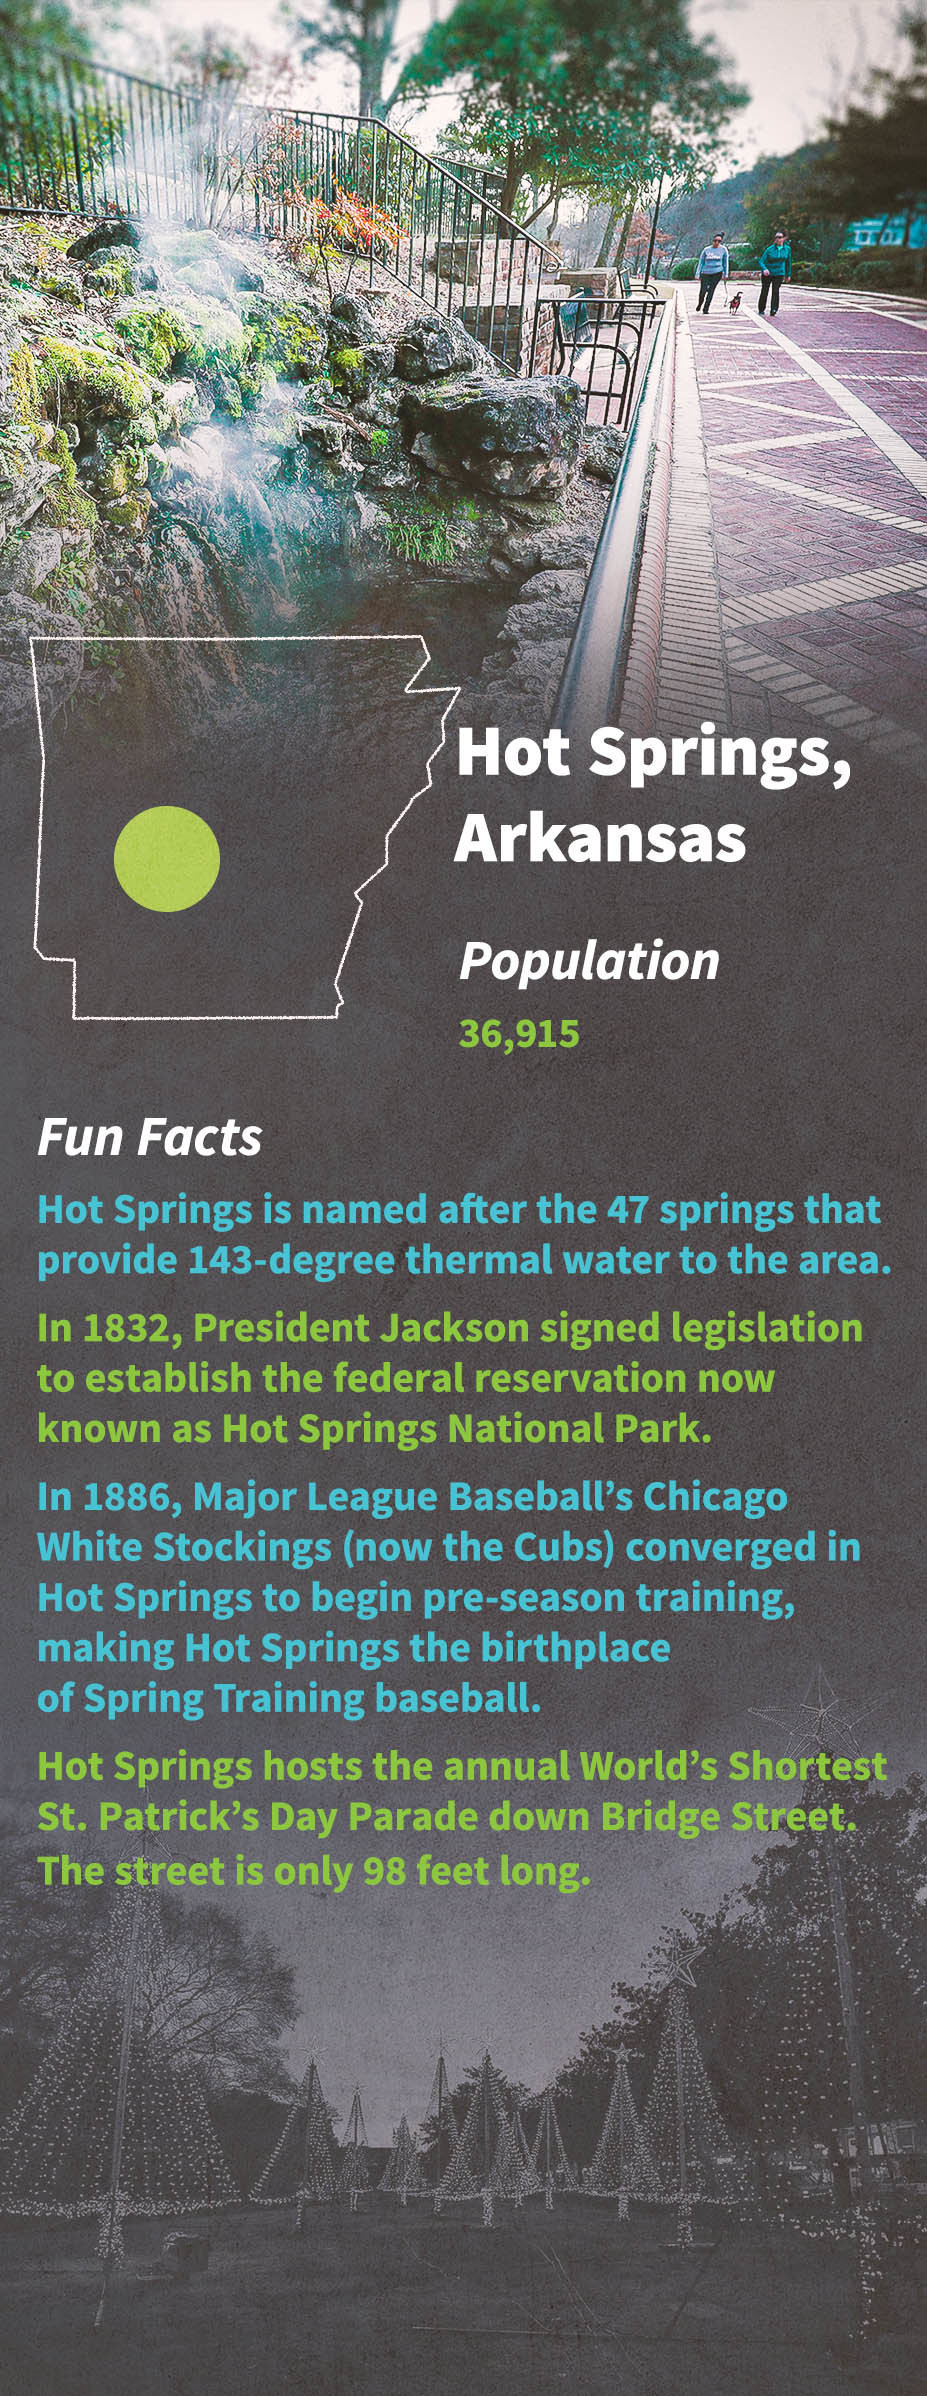 Hot Springs Fun Facts